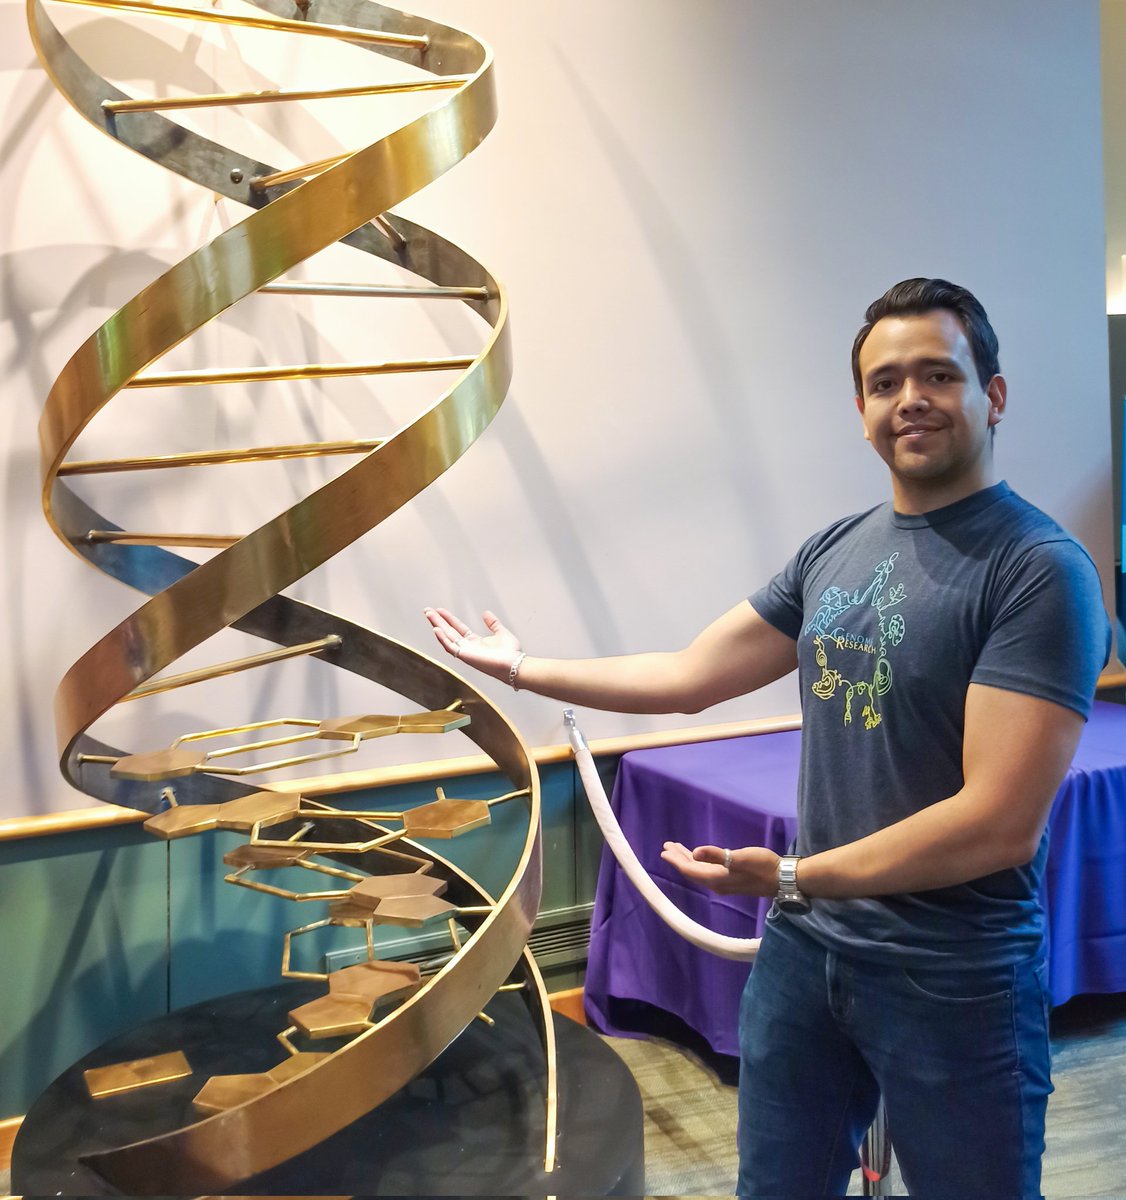 What is a genomics conference without a huge double helix? 🧬 Having a great time at #bog24 with my new t-shirt designed by @ATJCagan, courtesy of @genomeresearch #longreadsforlife